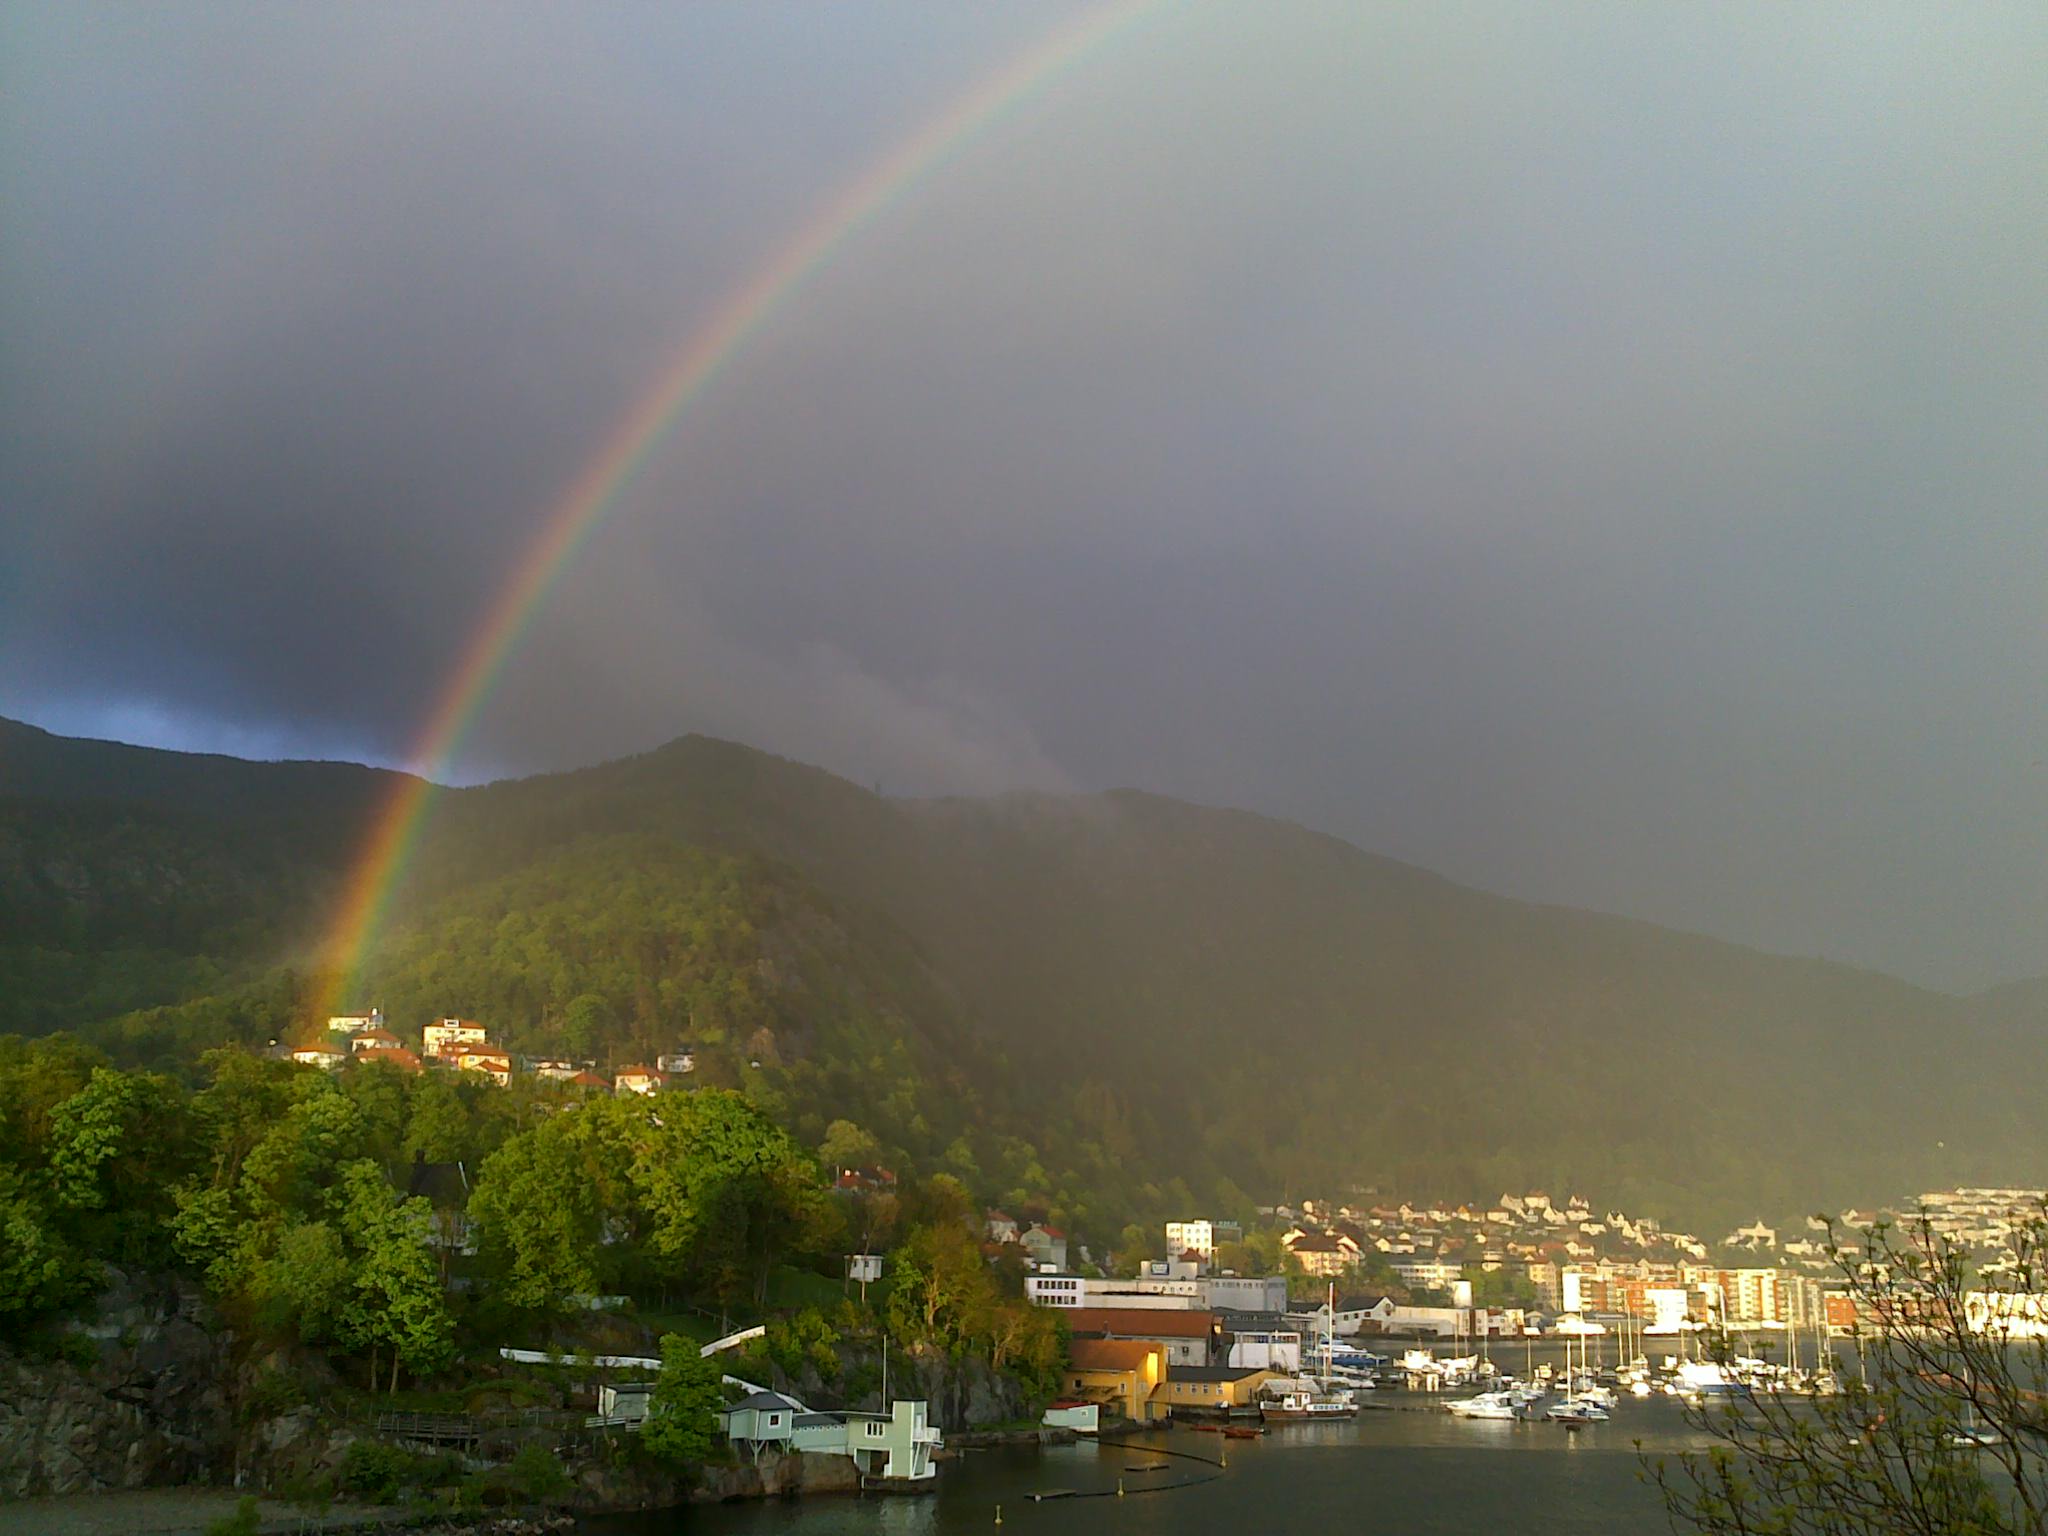 Rainbow over the town by the lake in the forest